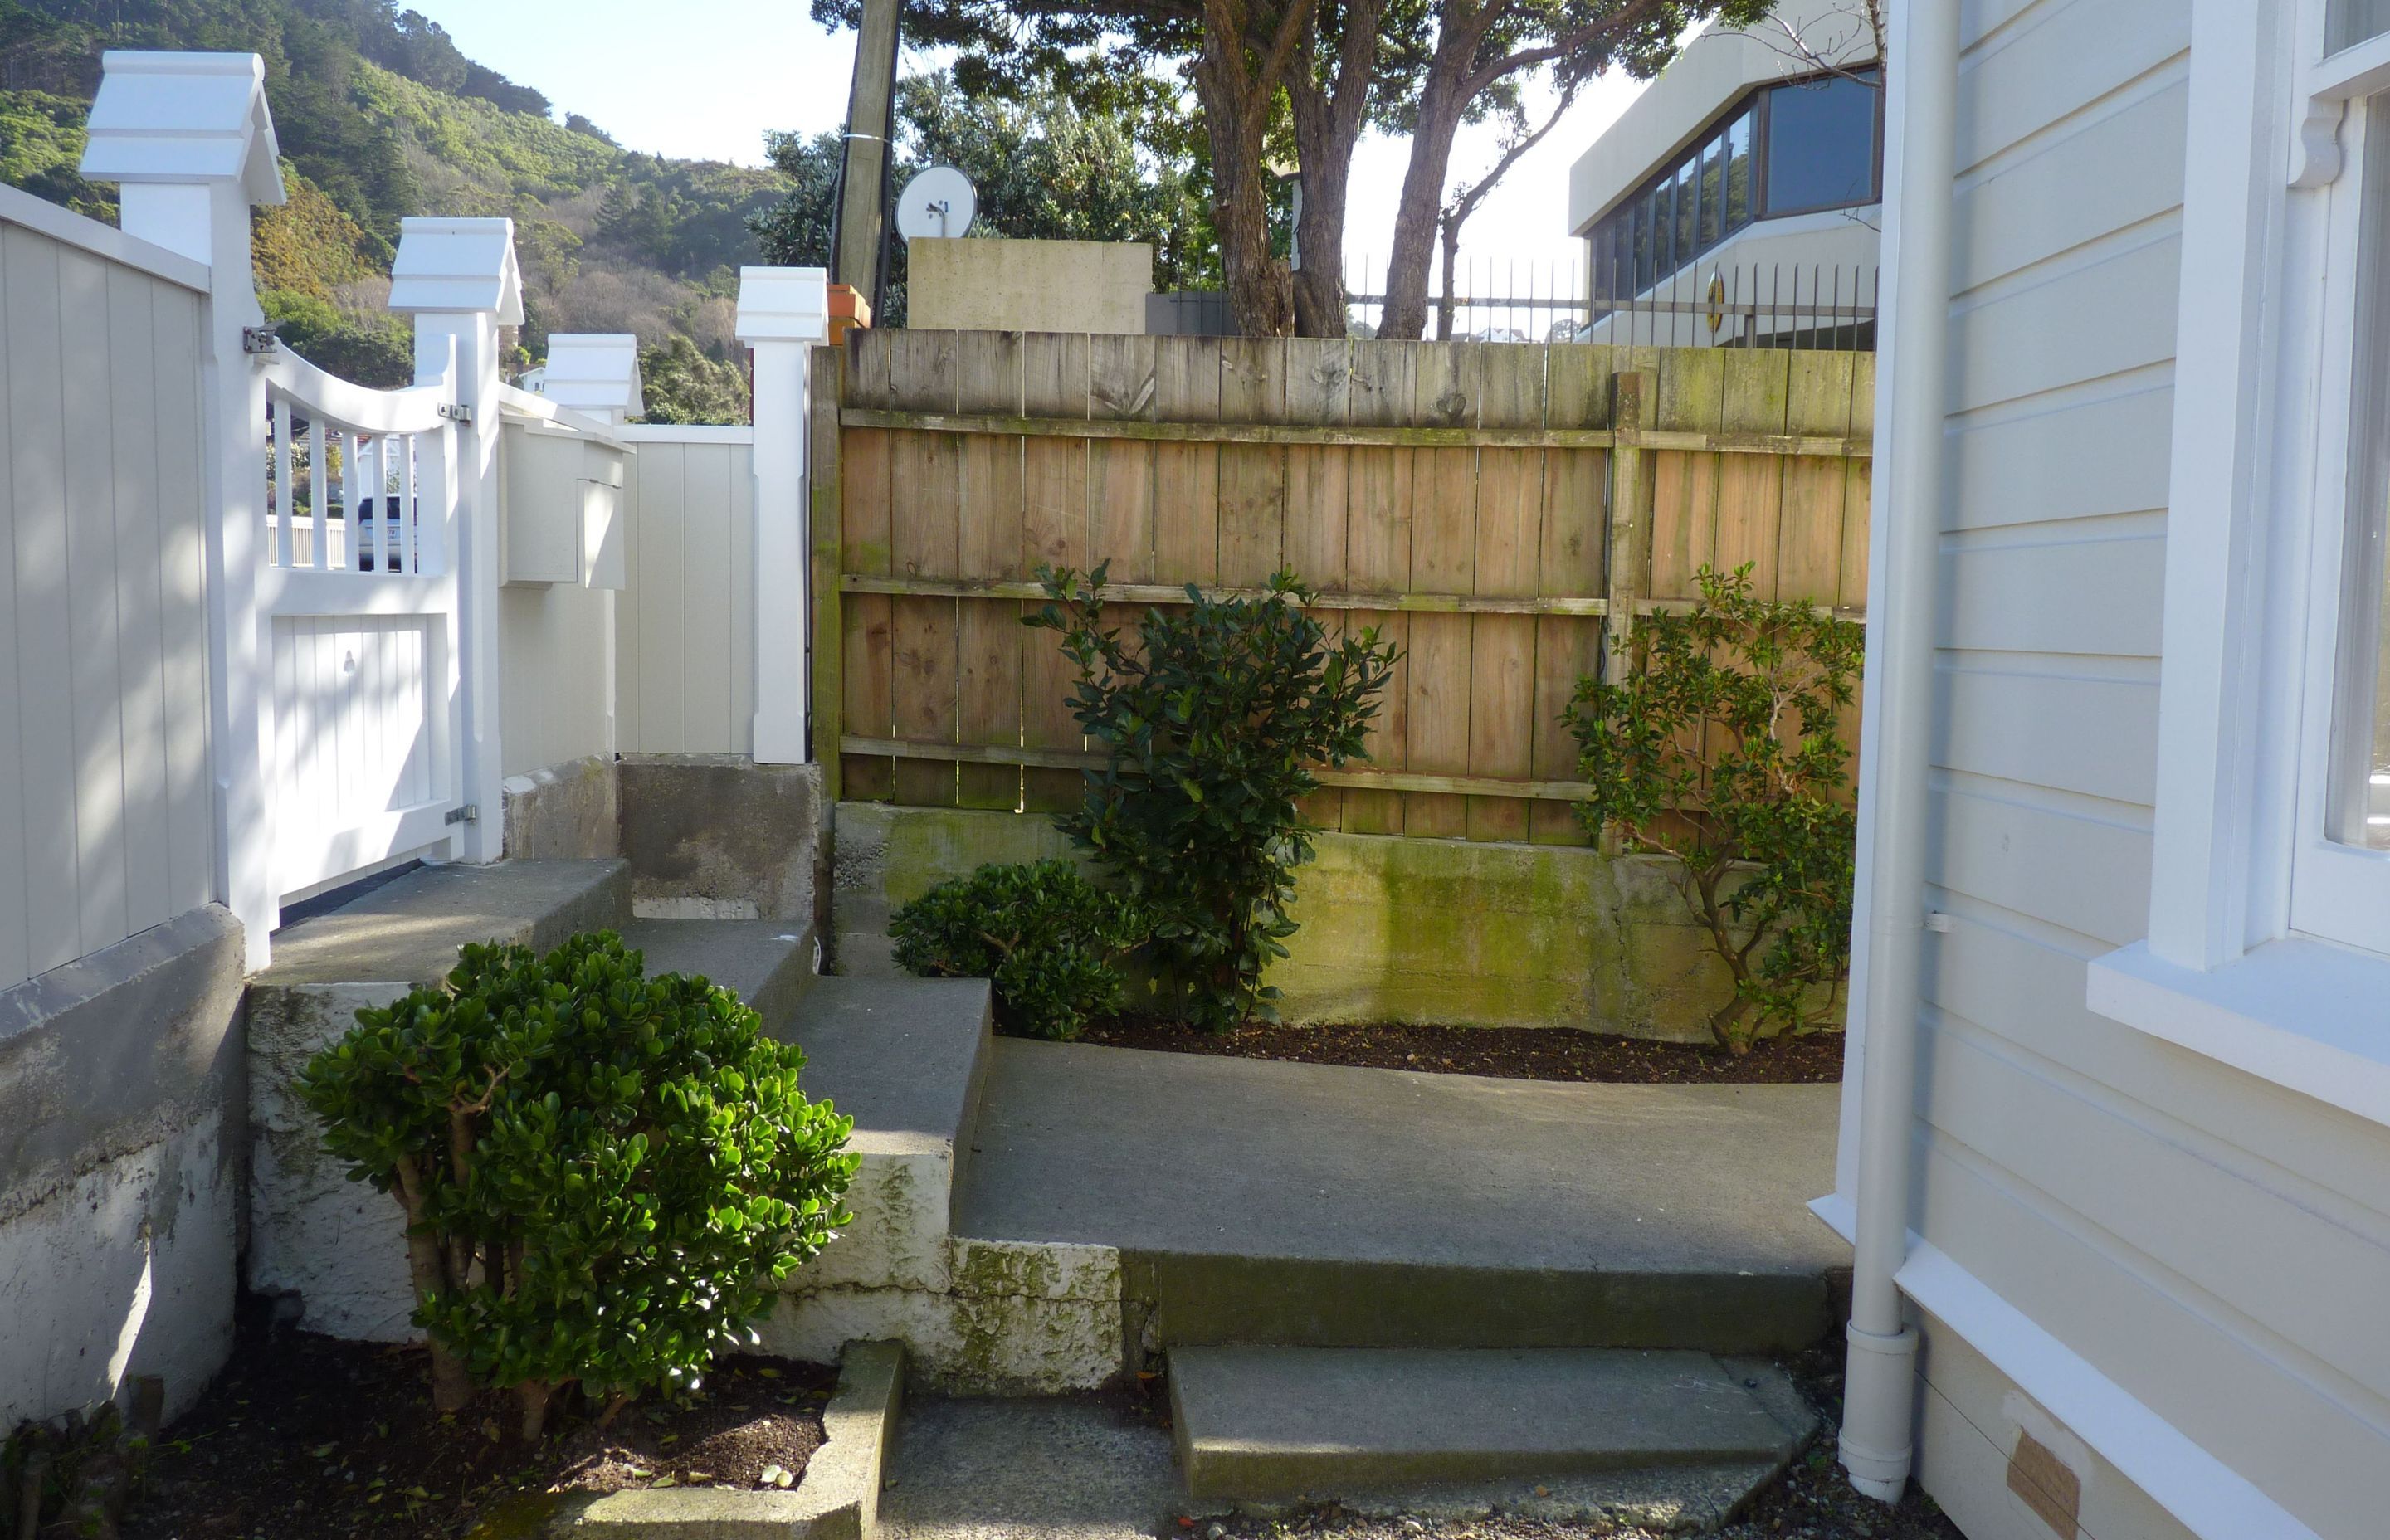 Before - the front entrance. We ended up huilding new concrete foundations to centre the path &amp; steps on front courtyard.